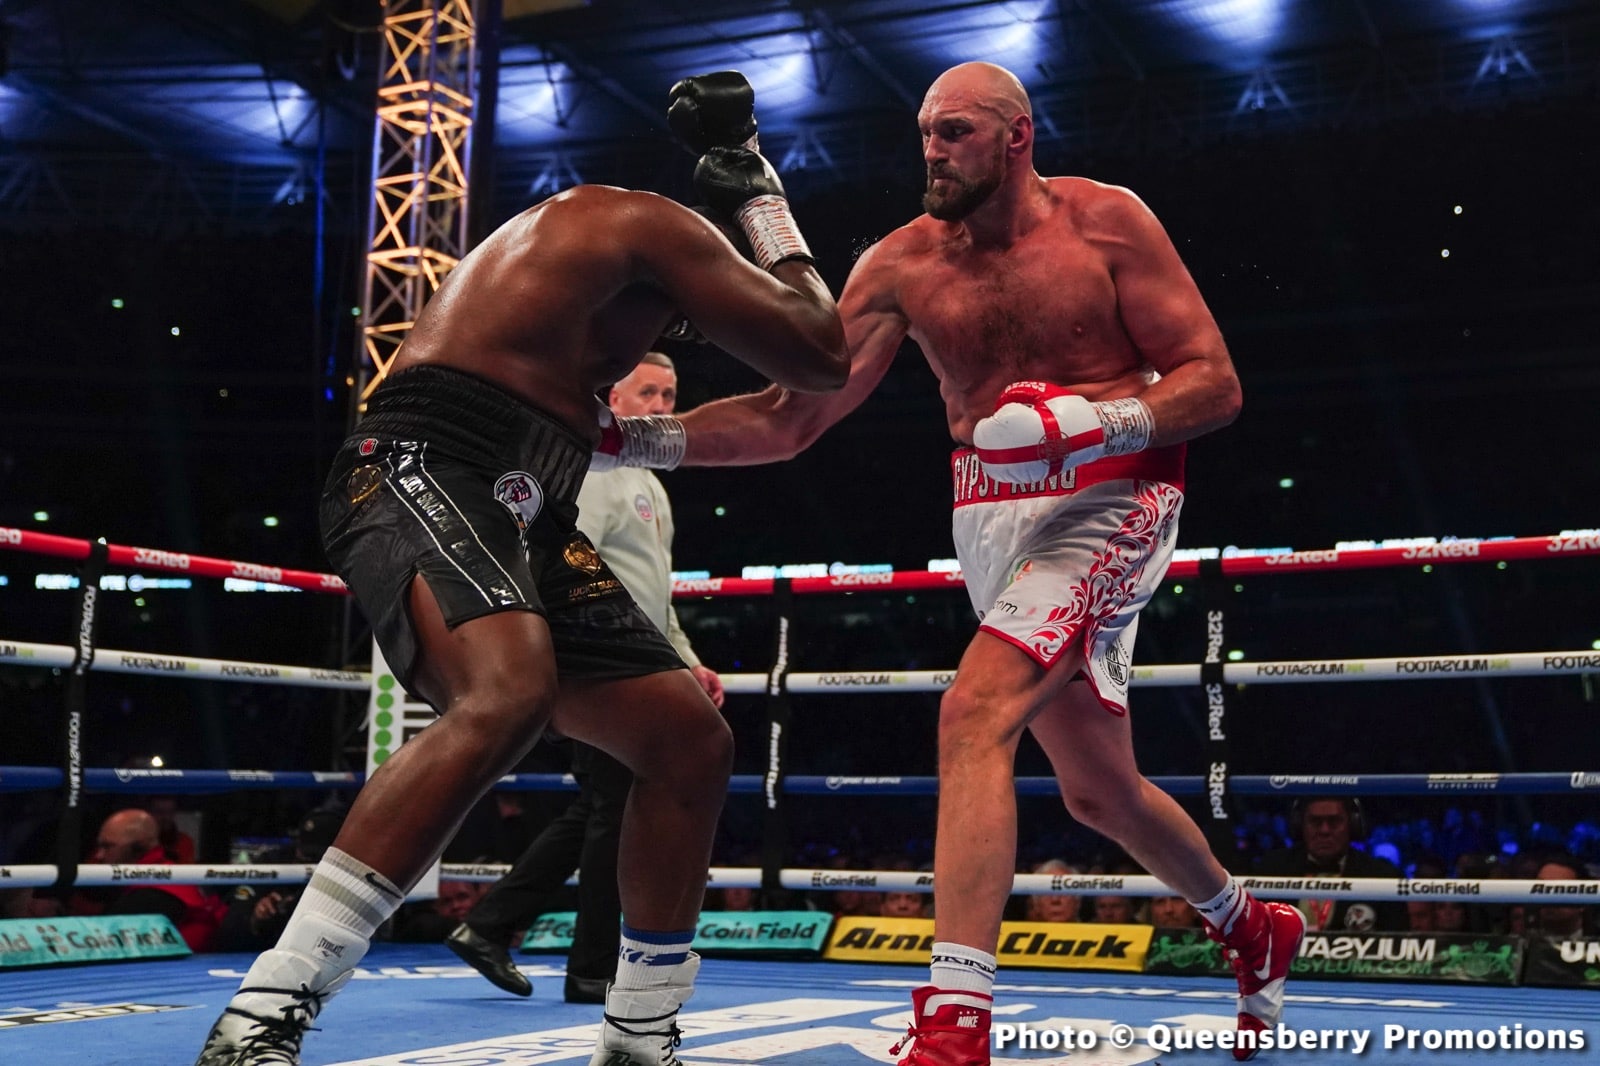 Tyson Fury vs. Dillian Whyte - LIVE action results from London